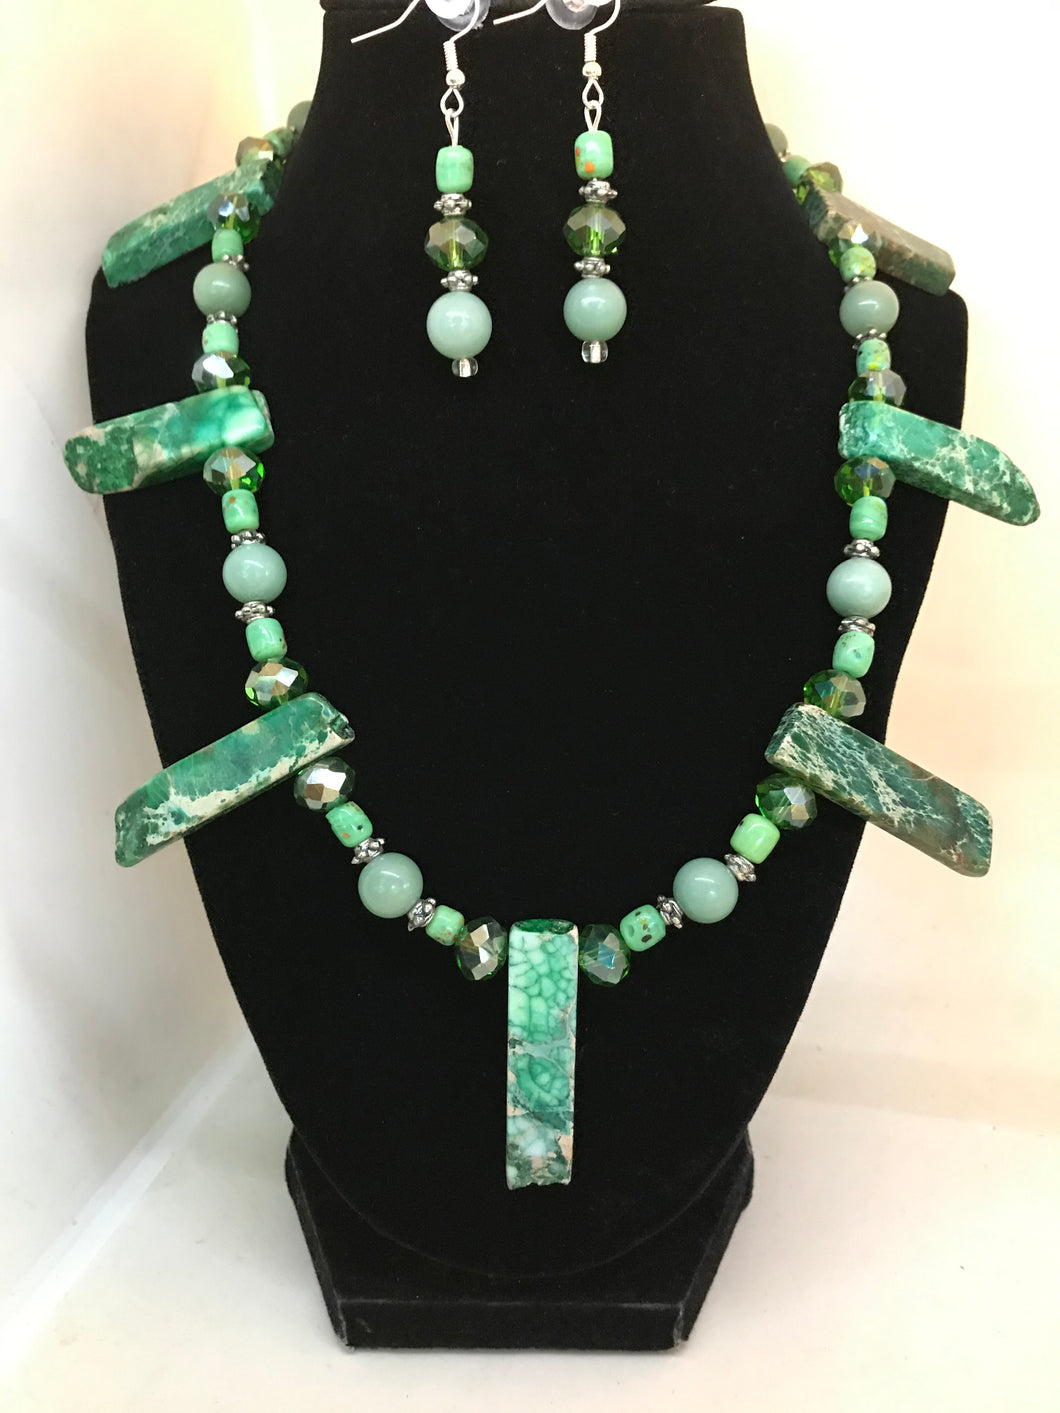 Green dyed imperial jasper stone necklace and matching dangling earrings